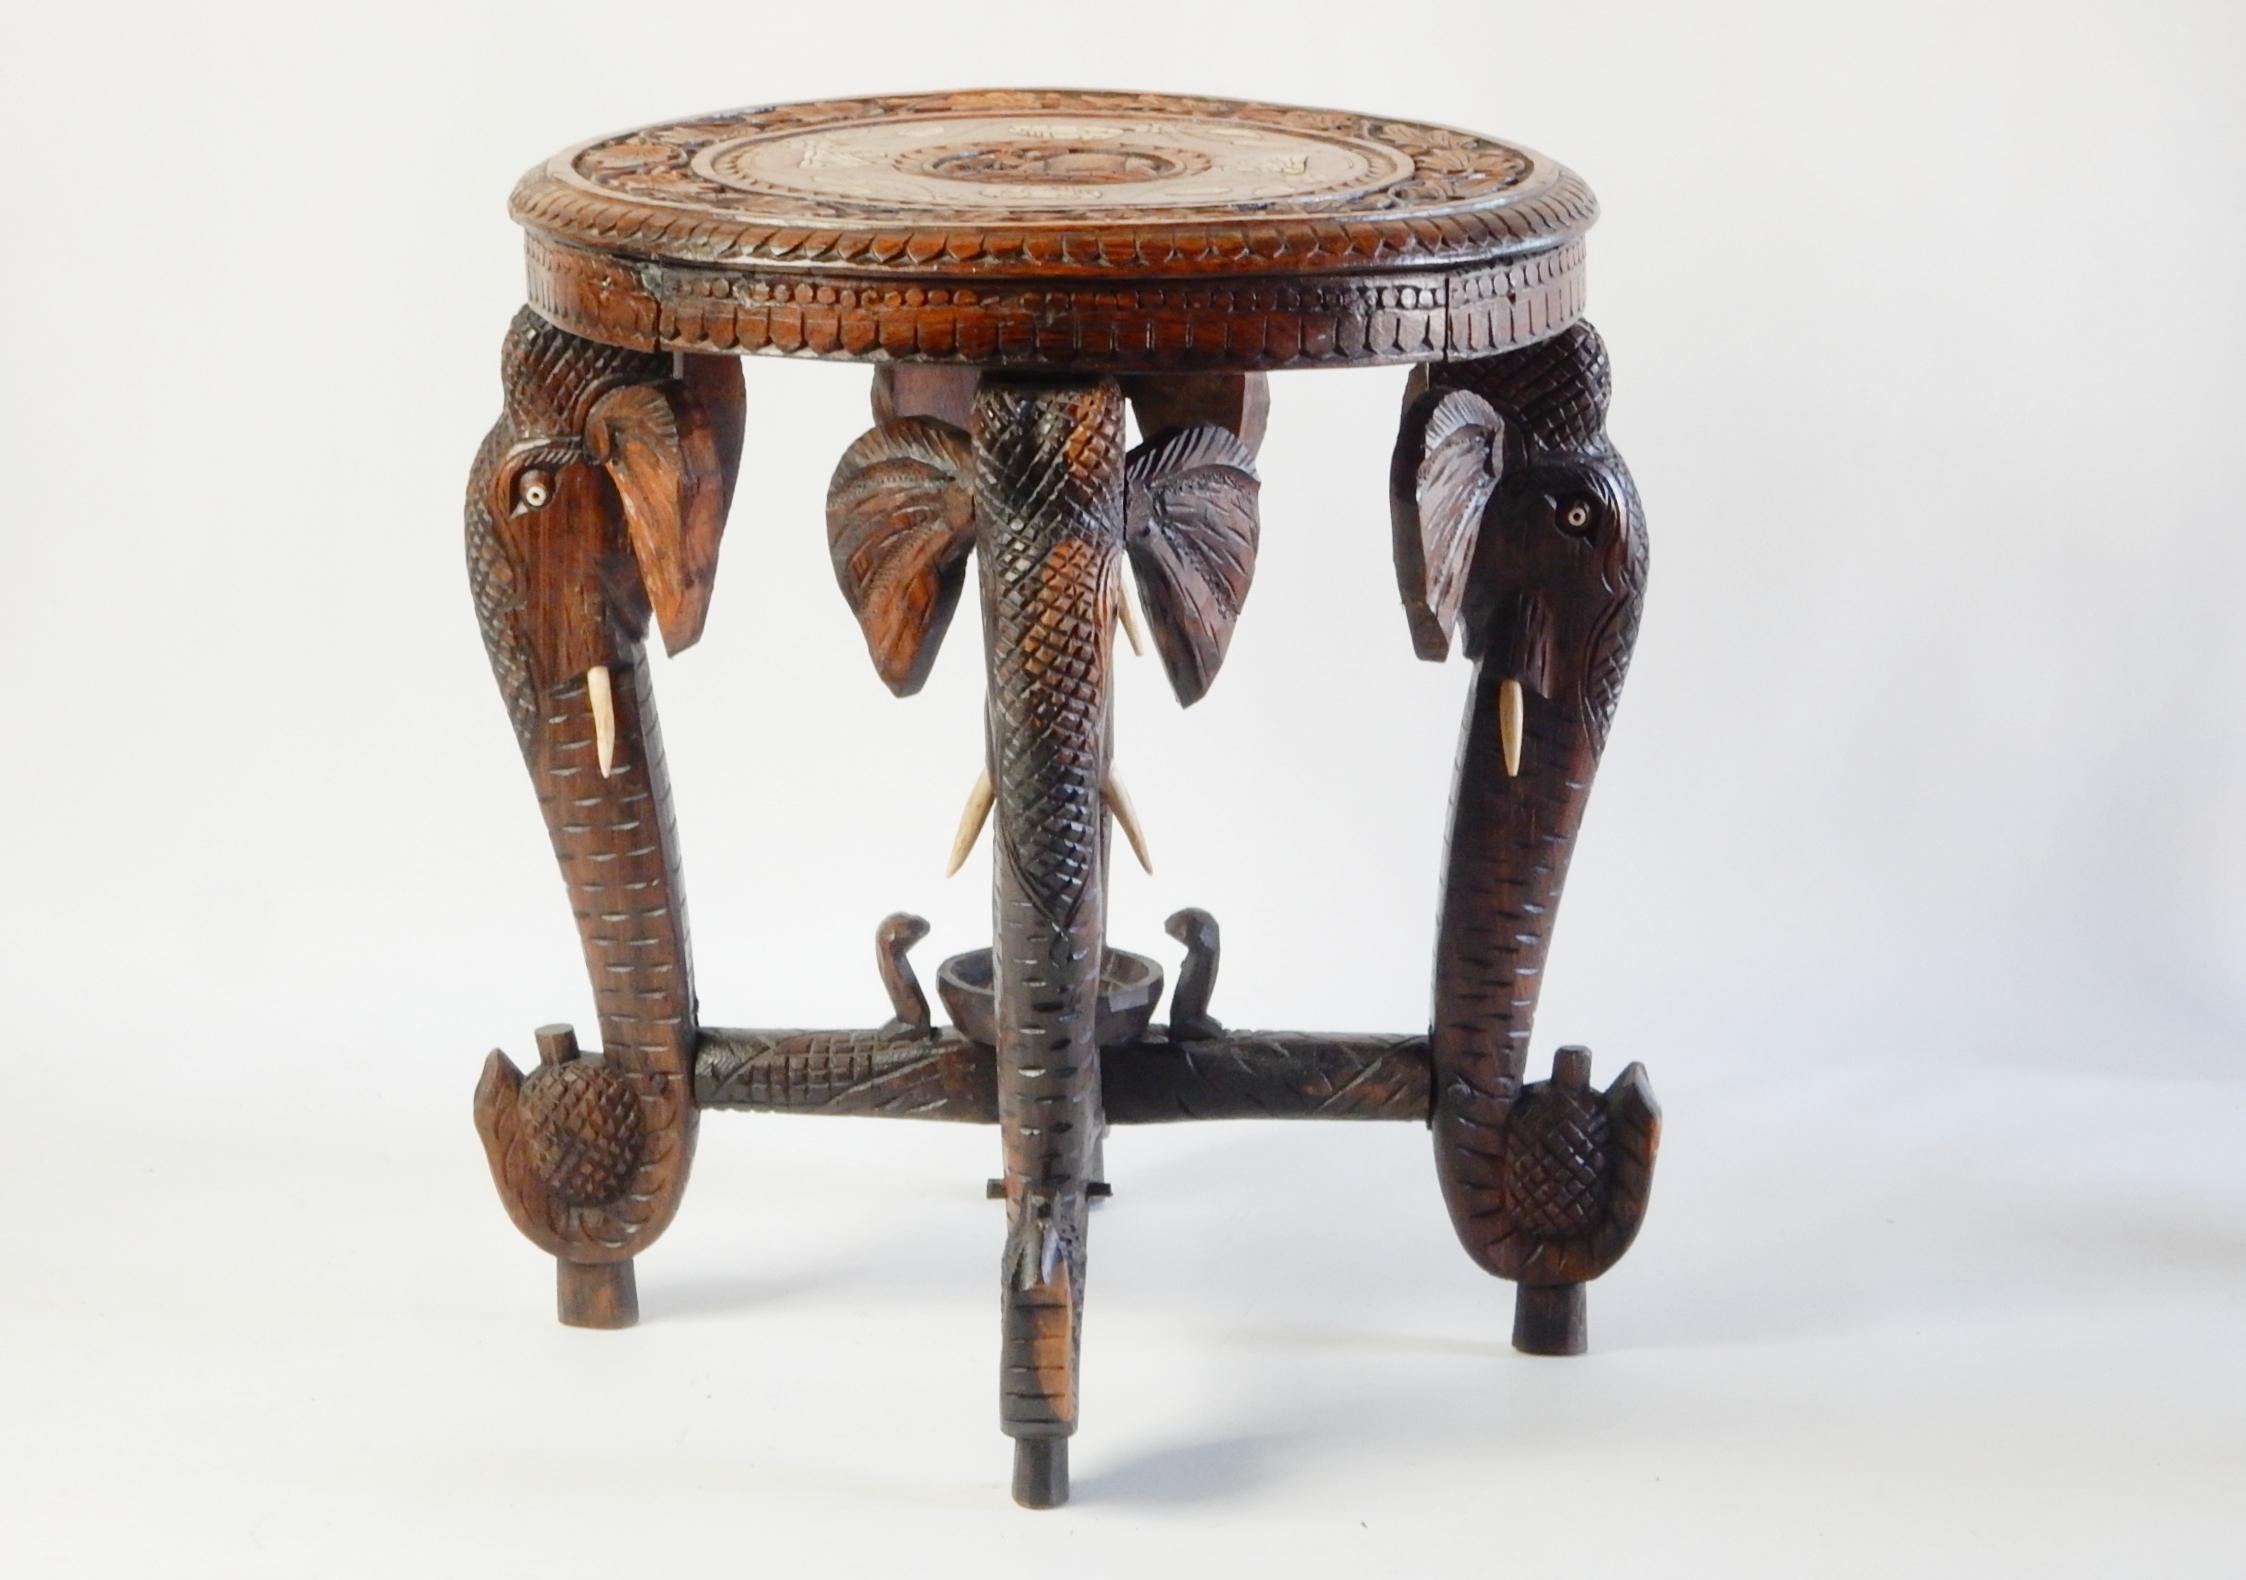 Antique 1900's Anglo-Raj Indian Elephant Leg Gueridon Table with Bone Inlay Top 2